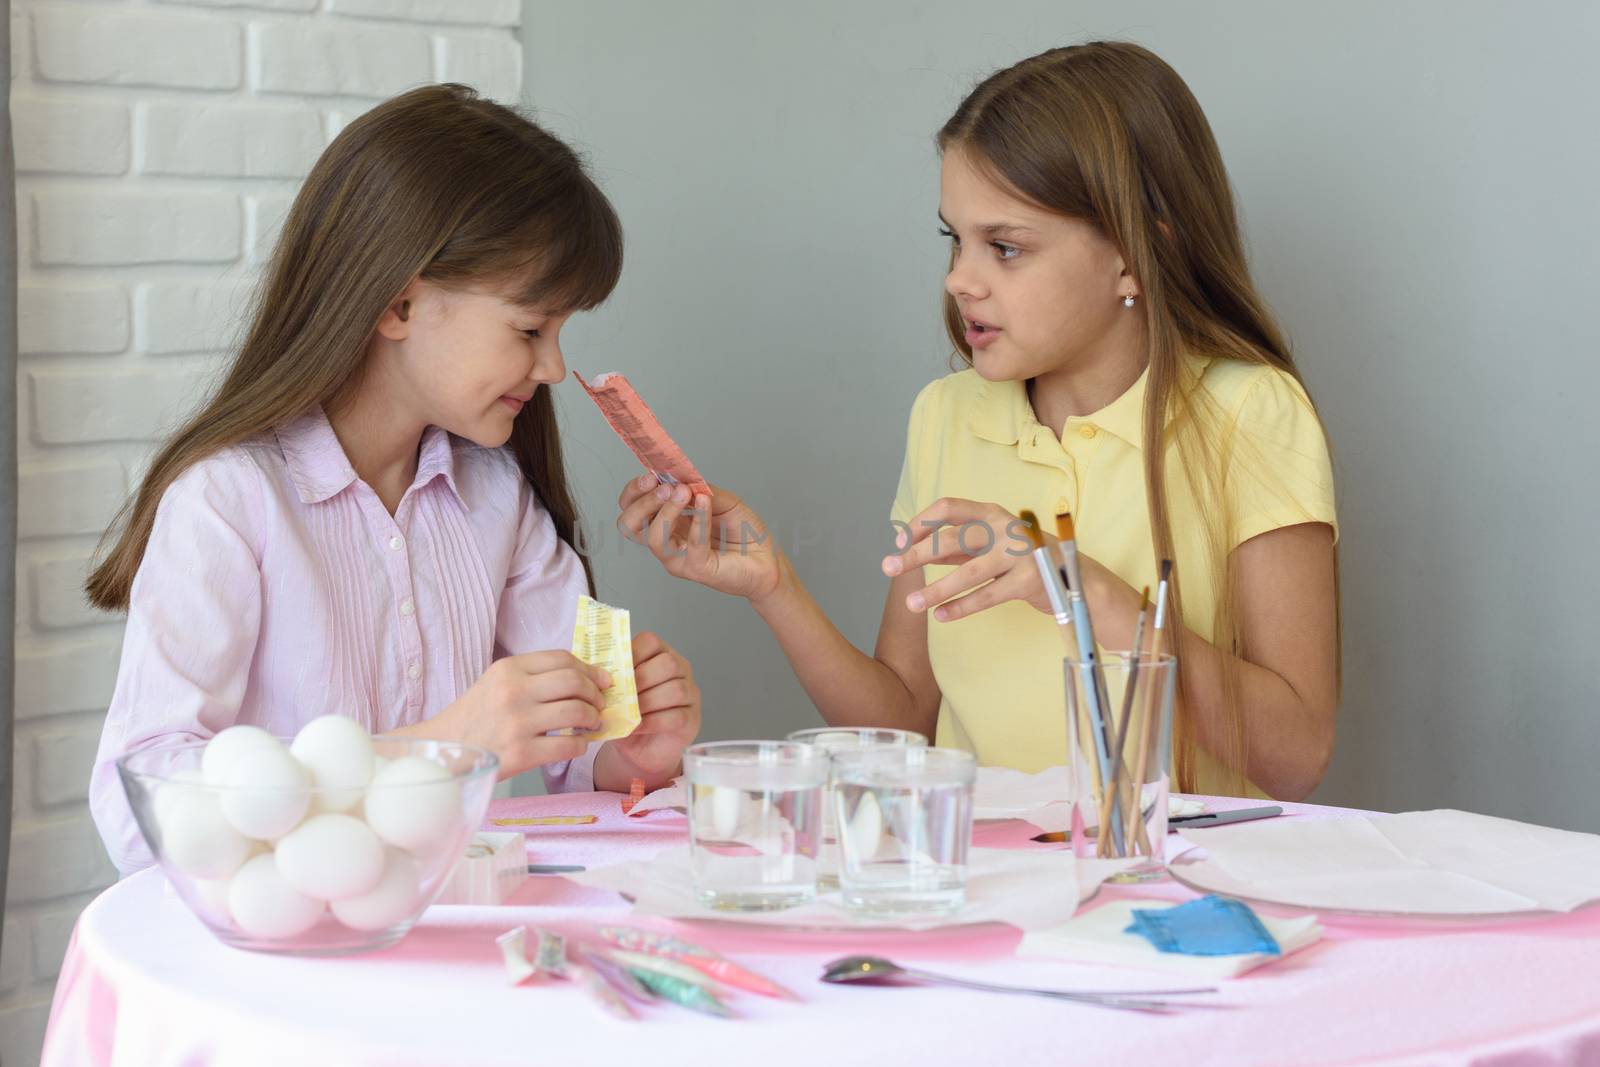 A girl shows the other girl the contents of a bag of food coloring